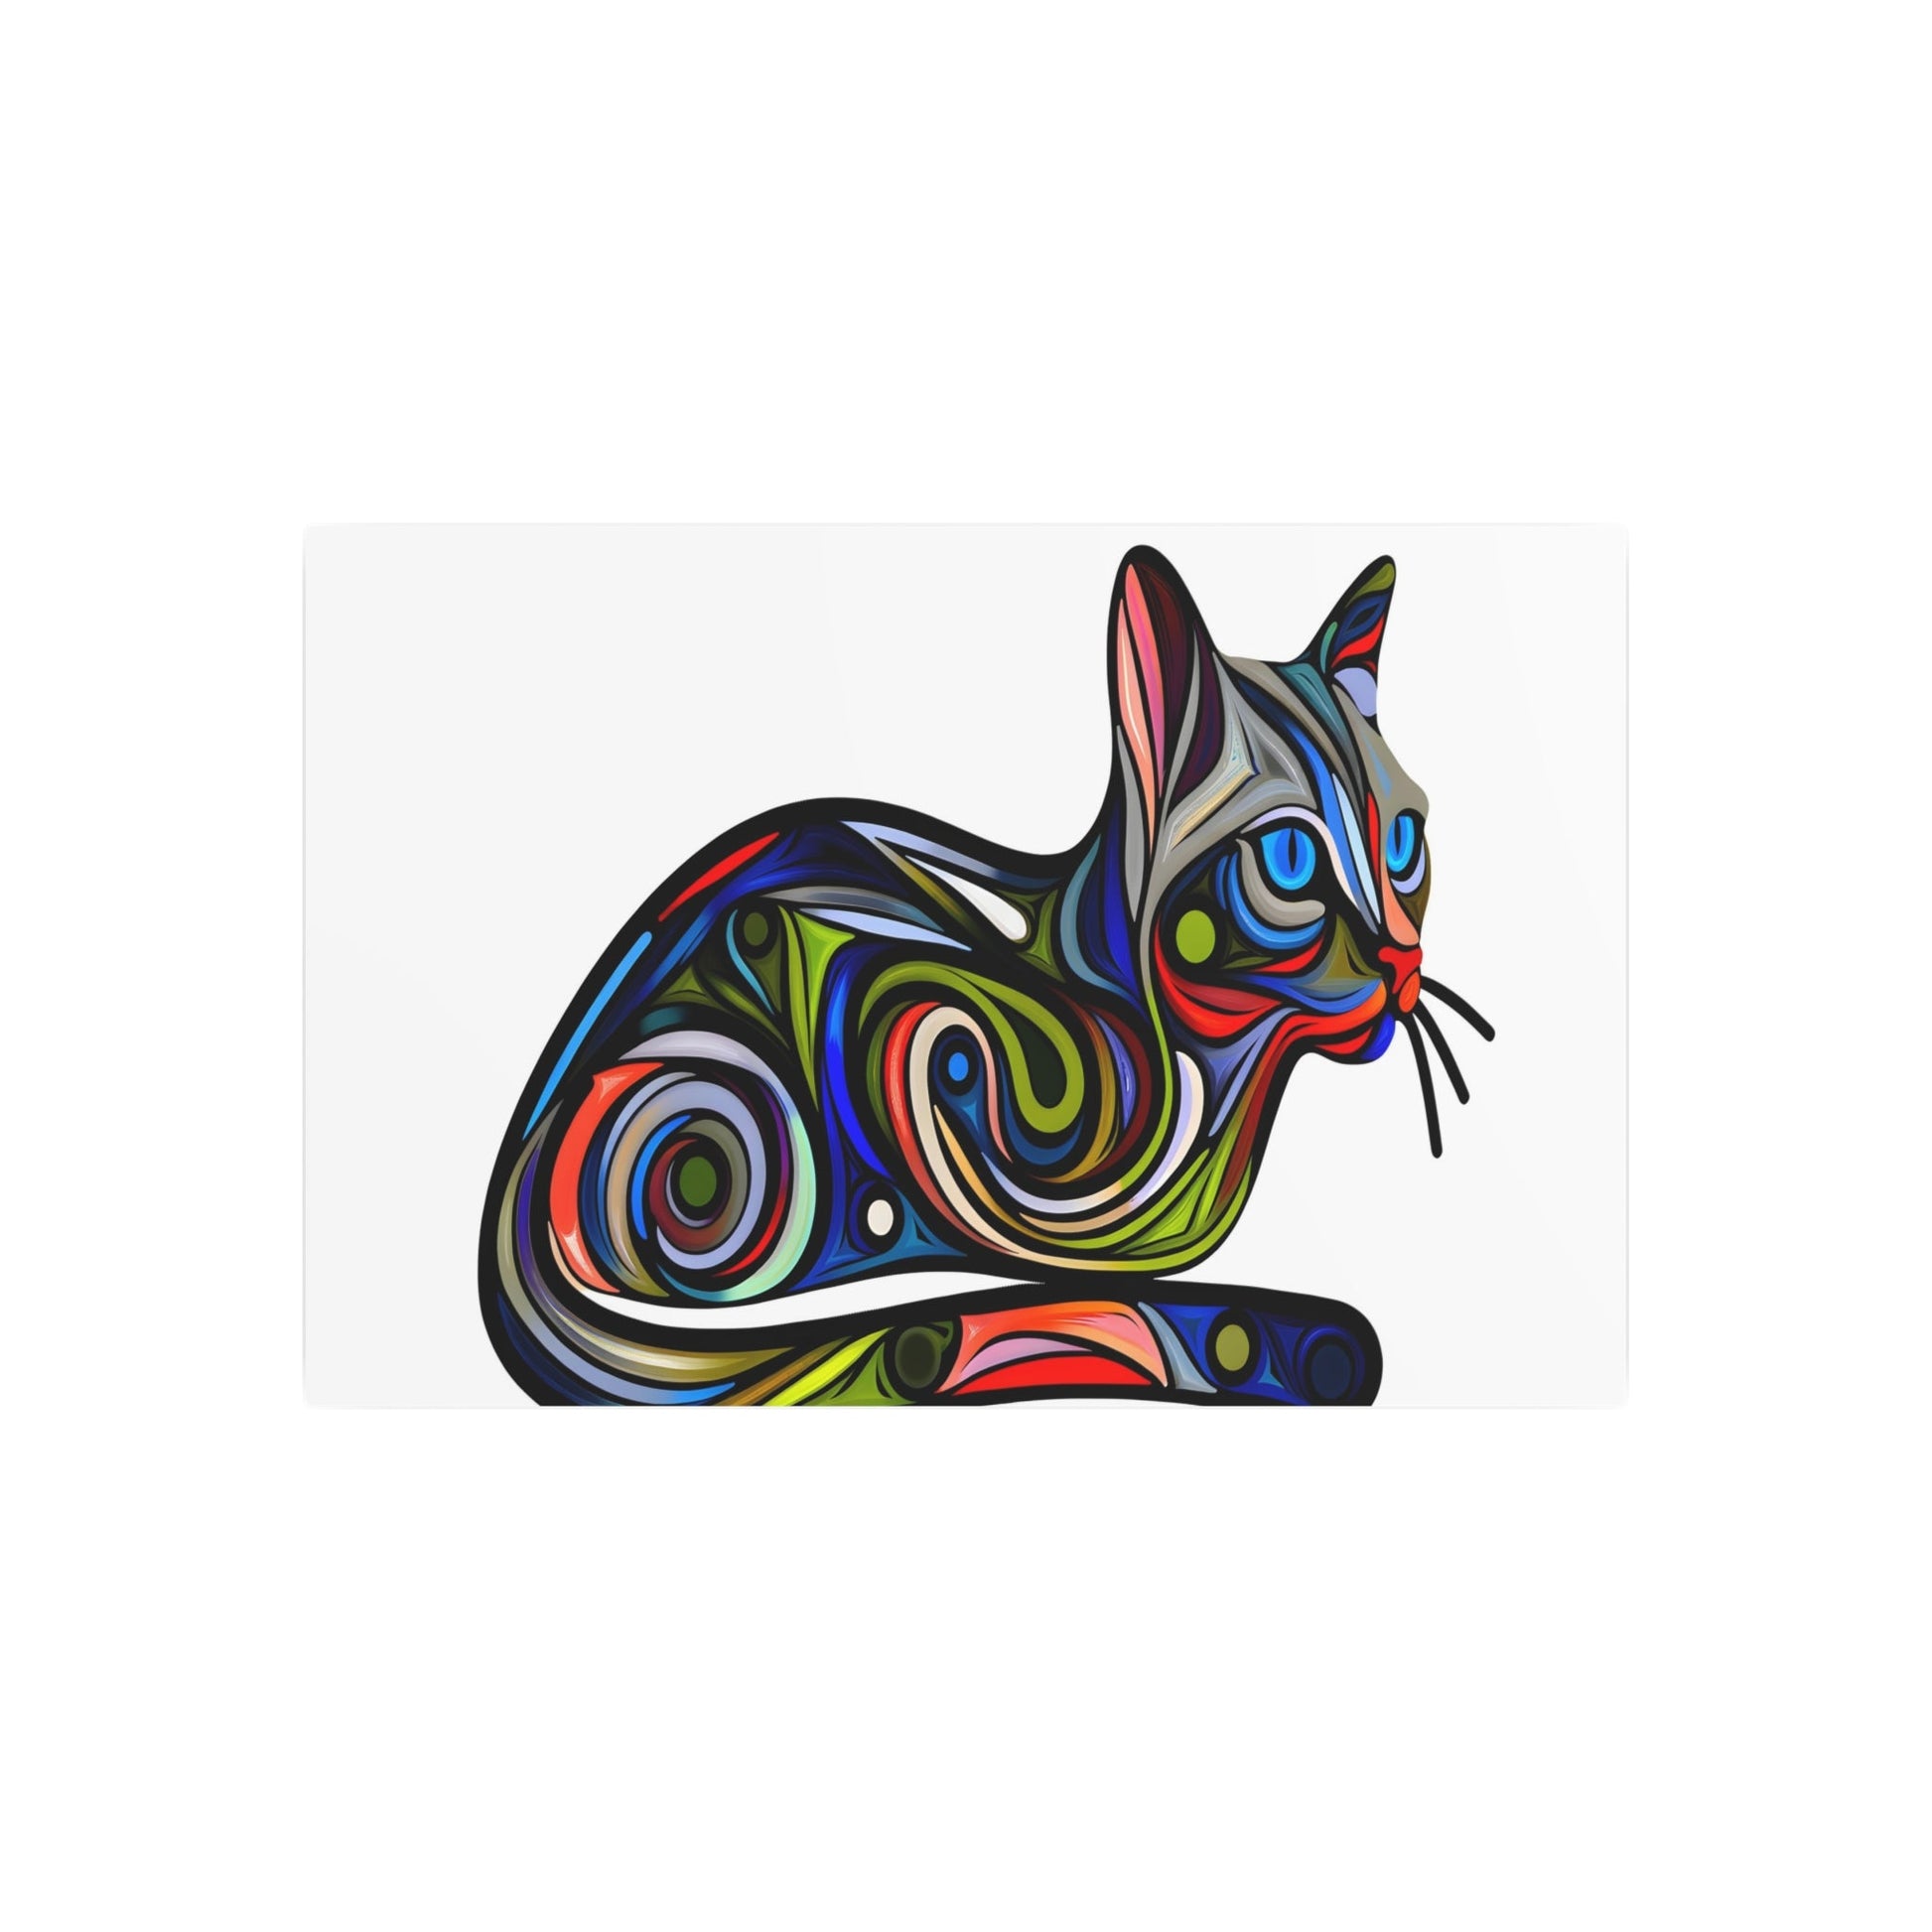 Metal Poster Art | "Vibrant & Intricate Digital Art: Modern & Contemporary Style Expressive Cat Image with Creative Patterns and Mysterious Playfulness" - Metal Poster Art 36″ x 24″ (Horizontal) 0.12''